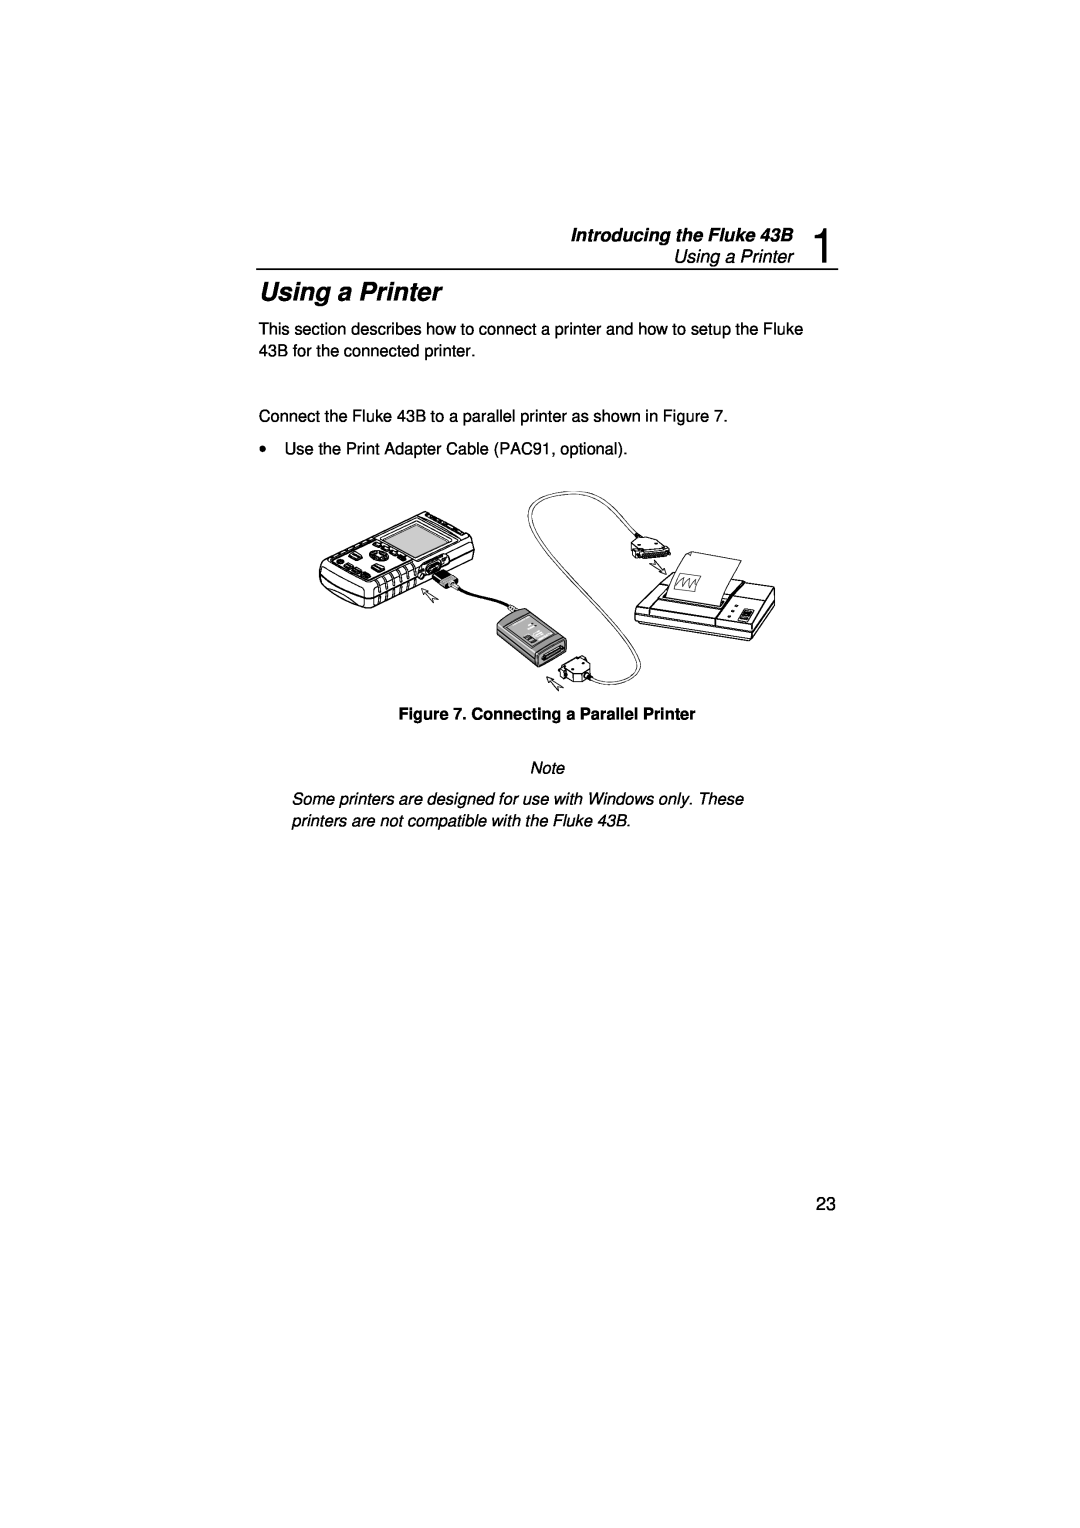 Fluke user manual Using a Printer, Introducing the Fluke 43B, Connecting a Parallel Printer 